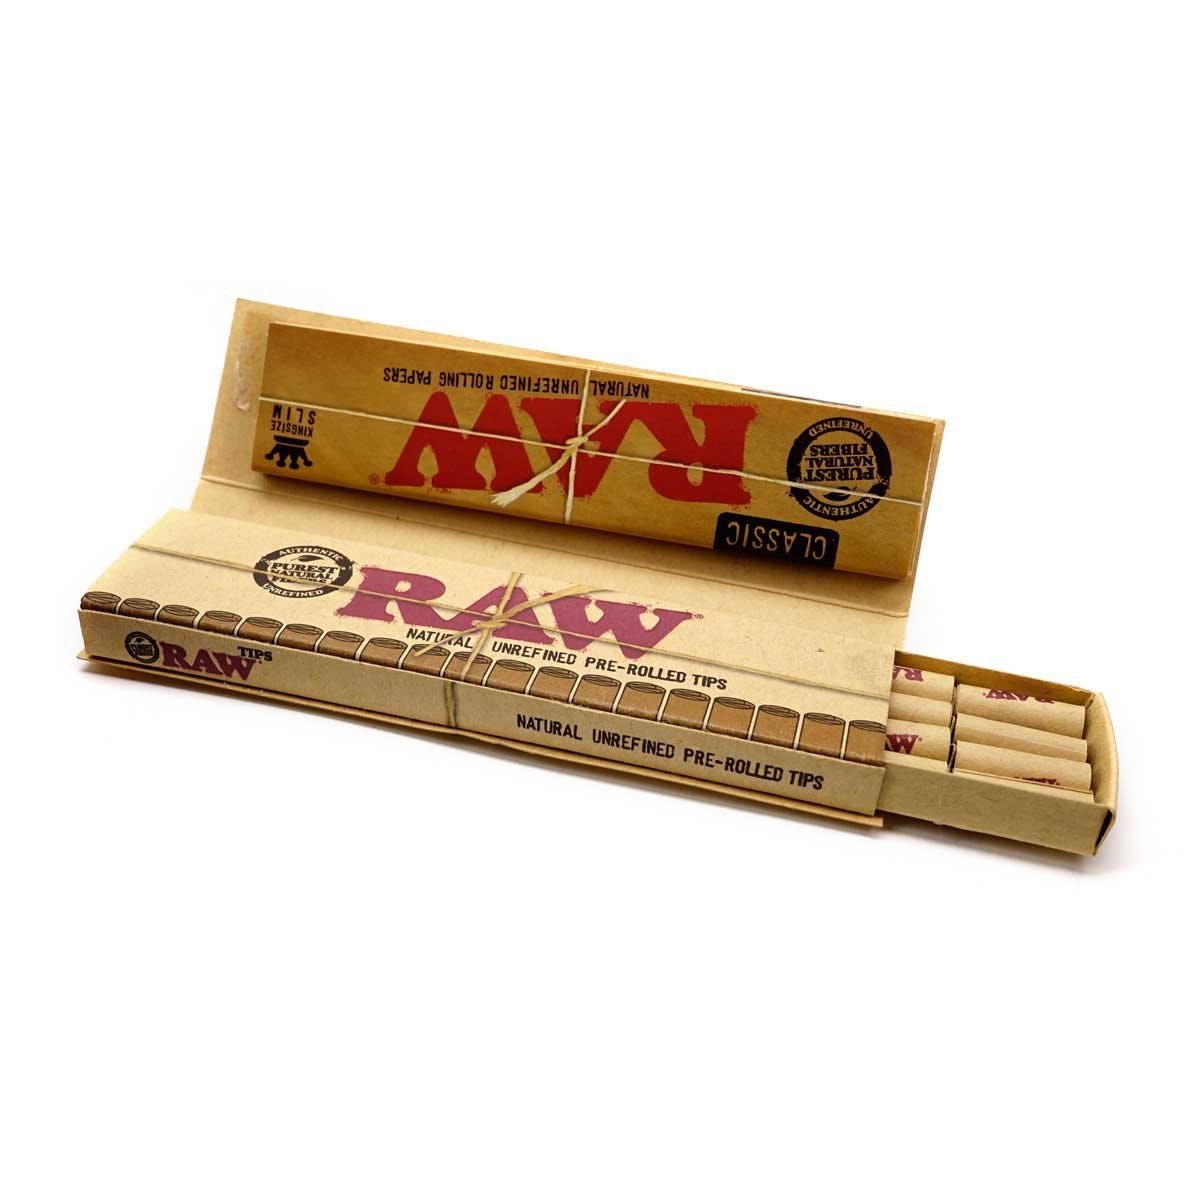 Raw King Size Master Piece + Pre-Rolled Tips